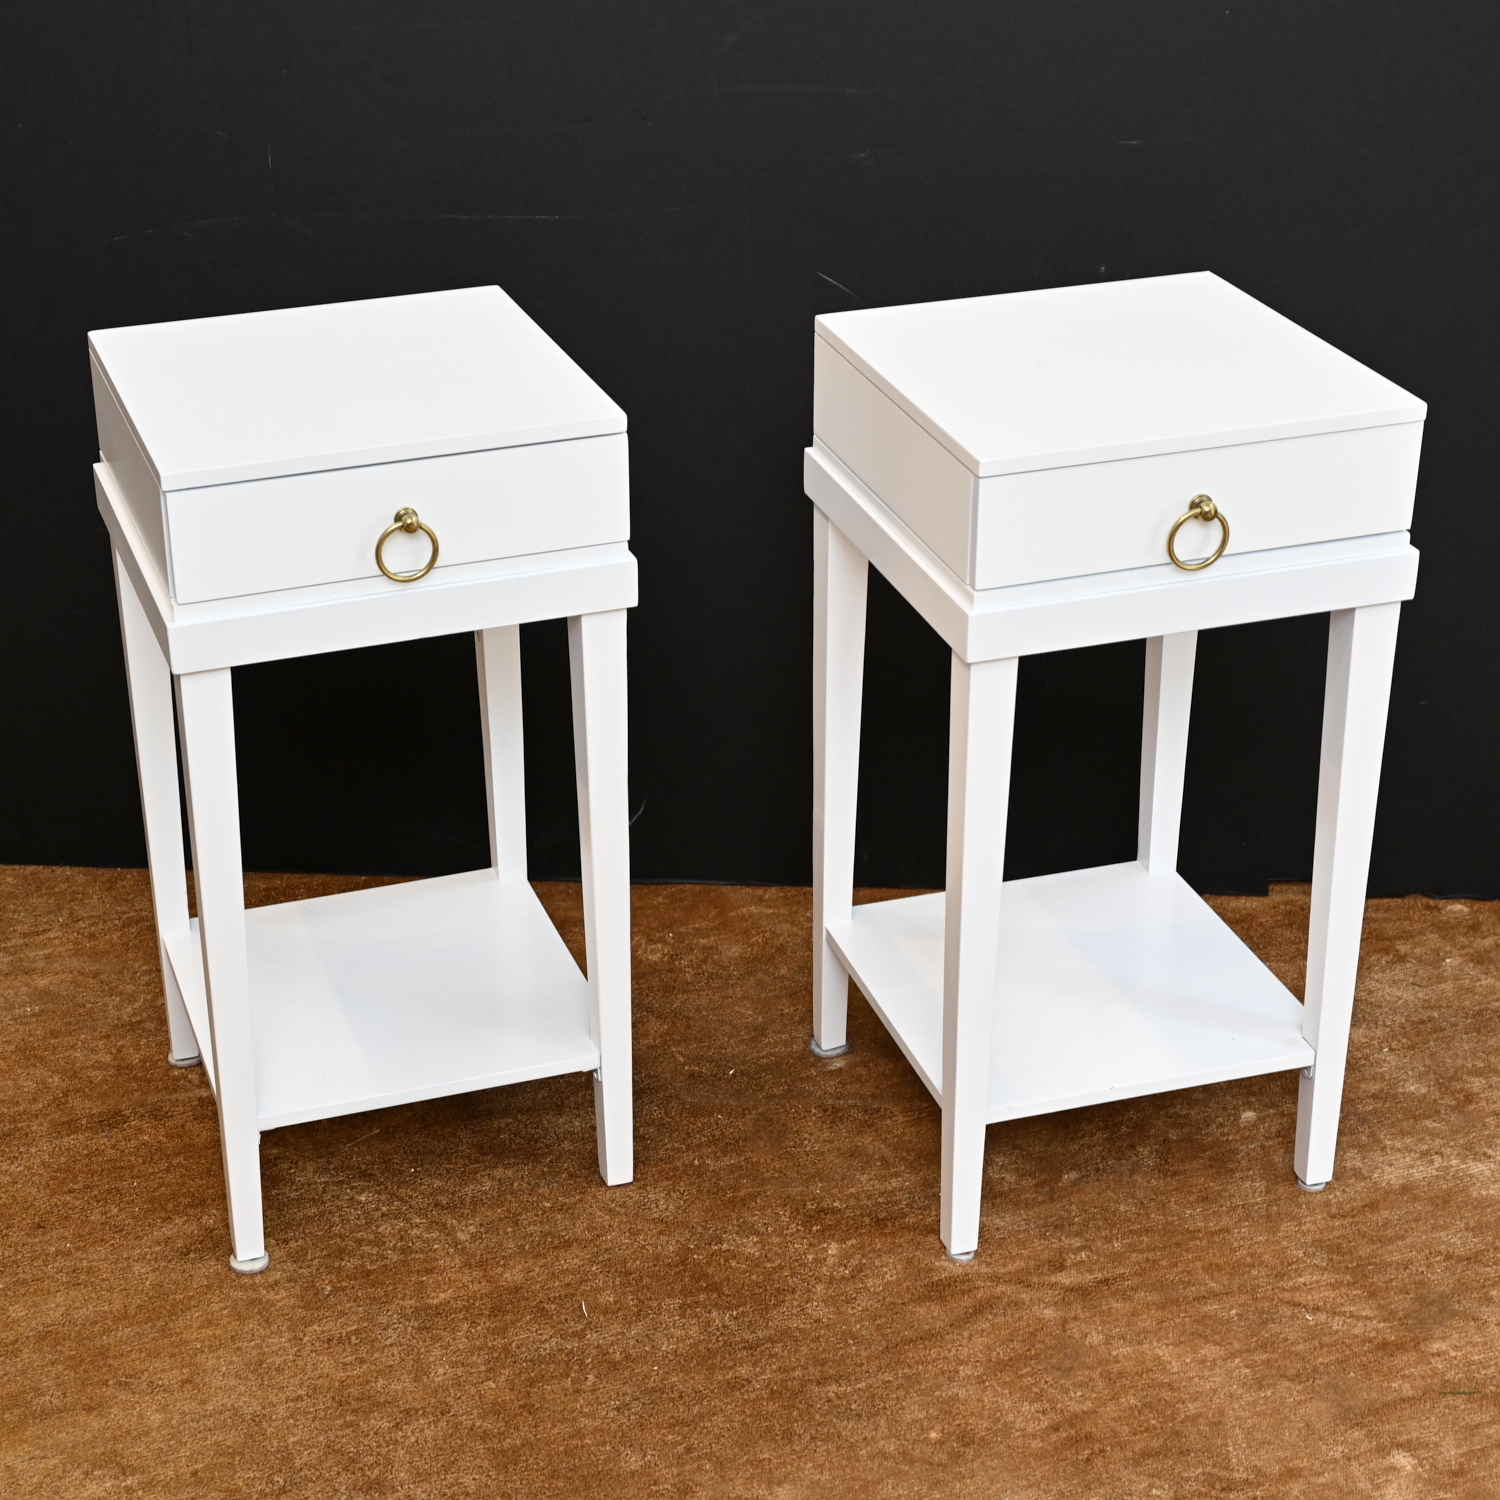 PAIR WHITE PAINTED MODERN NIGHTSTANDS 2ce5ab